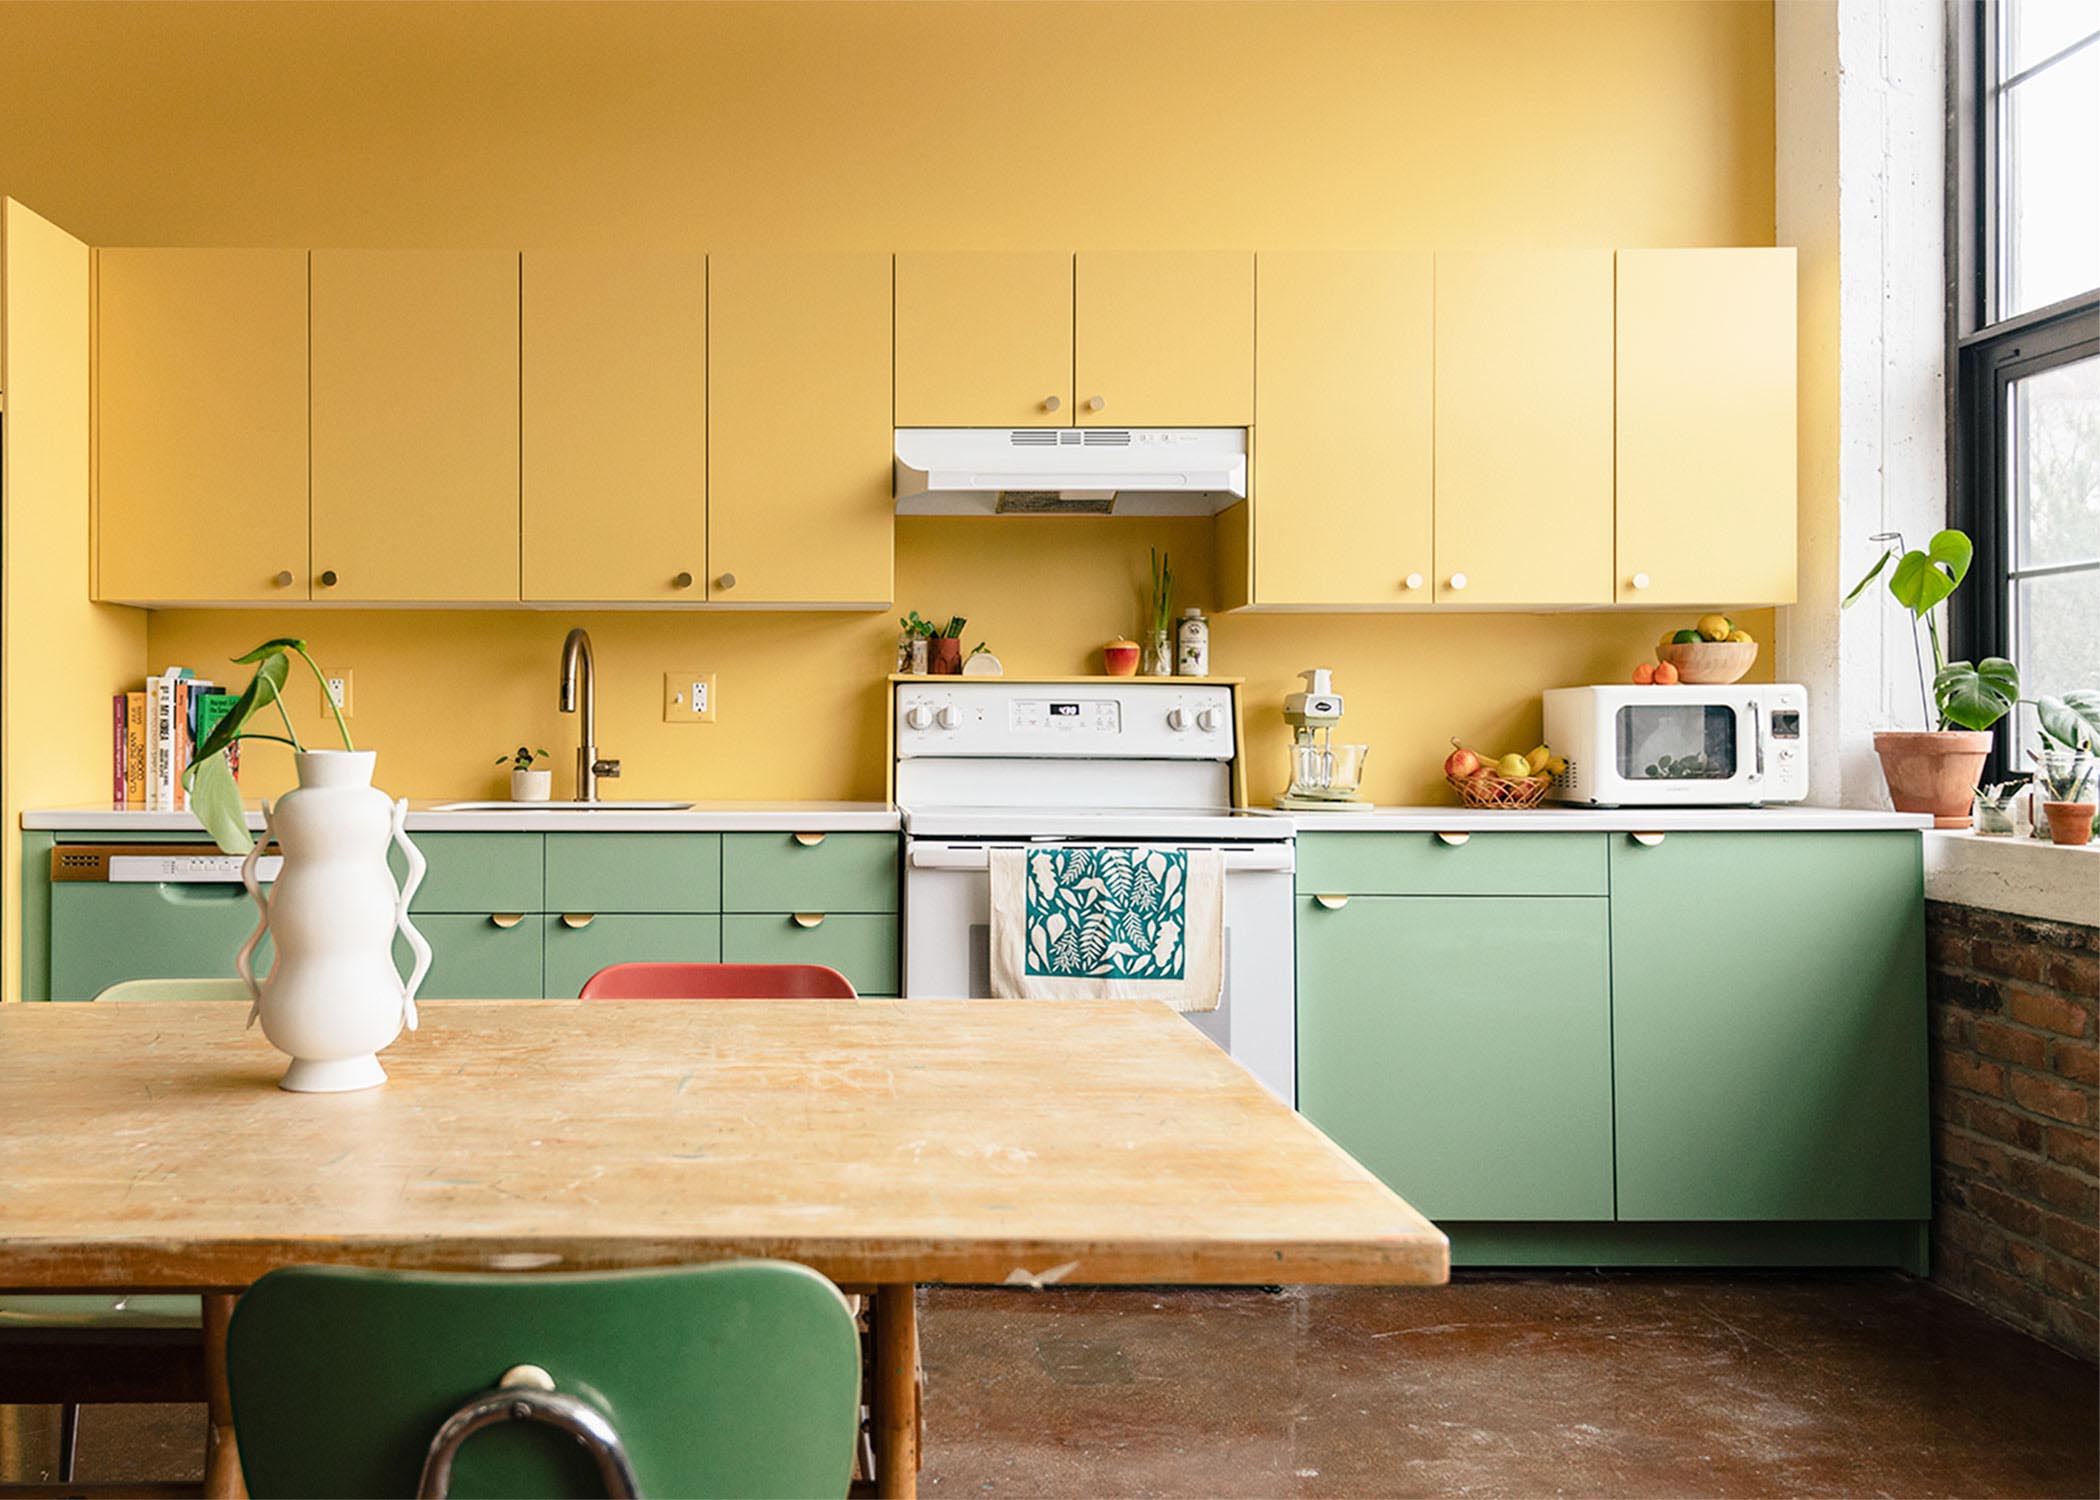 Move Over White, It's All About the Colorful Kitchen – Clare